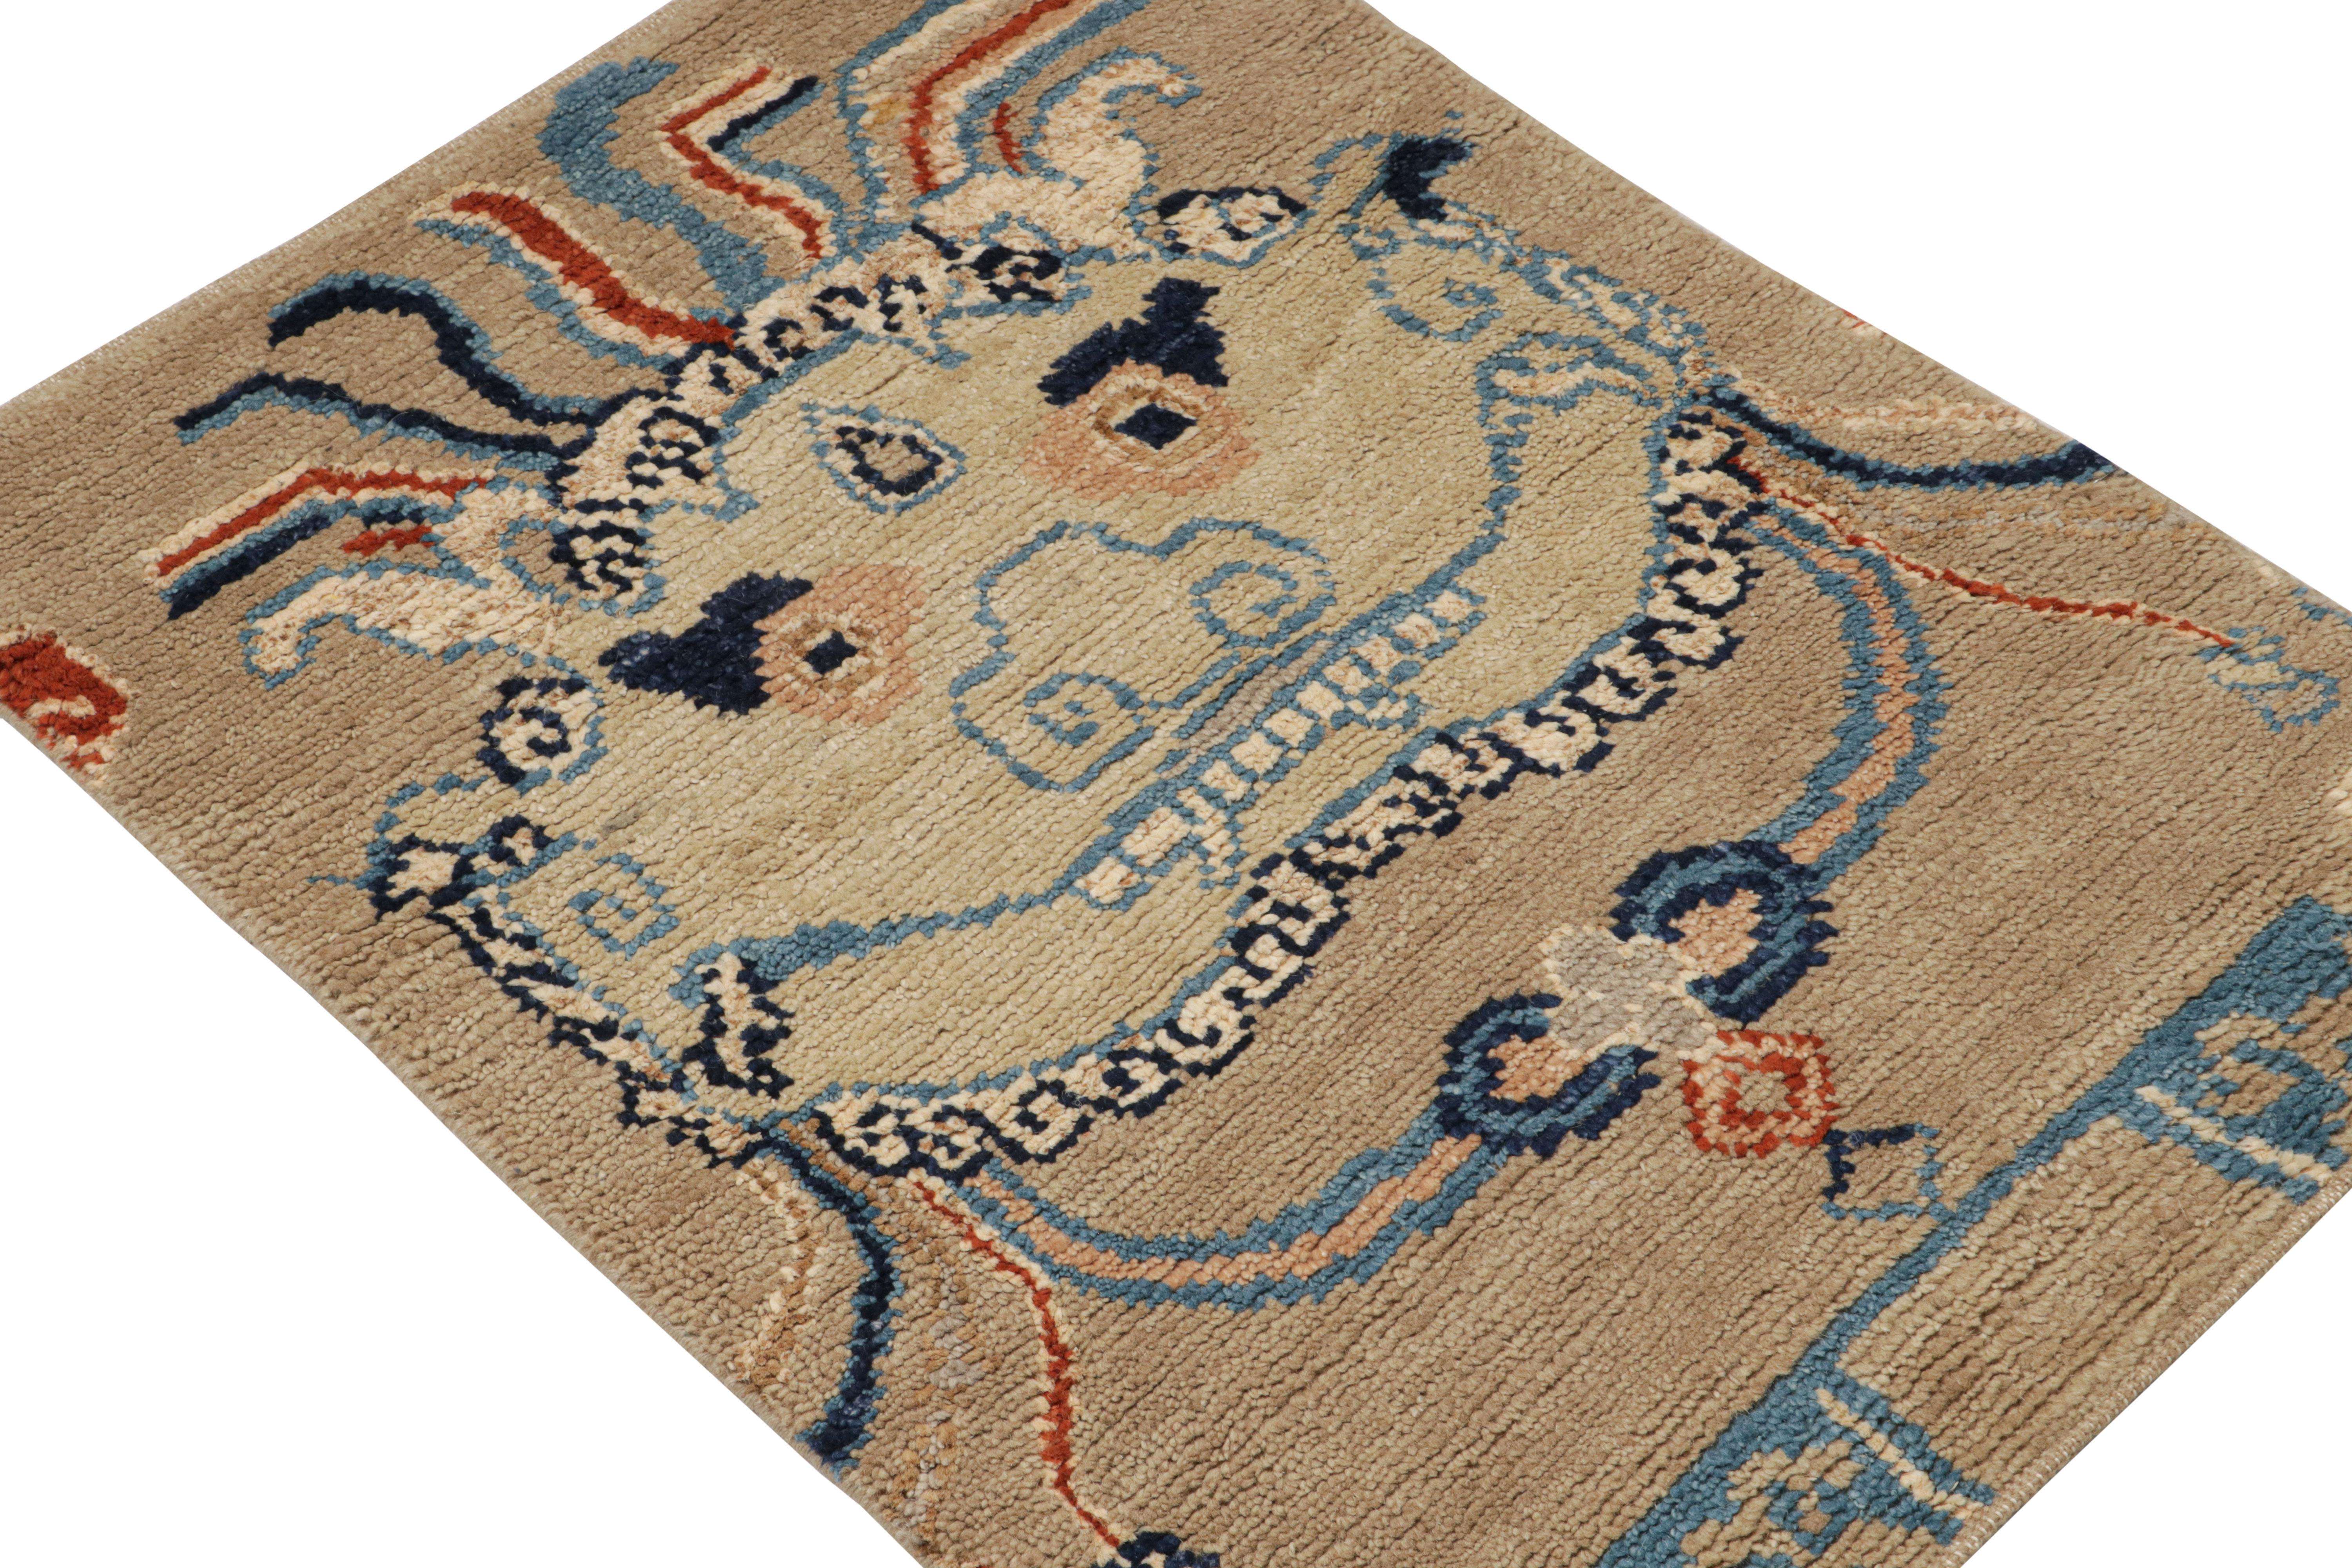 Hand-knotted in wool, this 2x3 rug from the Modern Classics Collection is inspired by Chinese antique rug depictions of this mythological creature. 

On the design: 

Connoisseurs will admire this pictorial scatter rug as a nod to a regal, dramatic